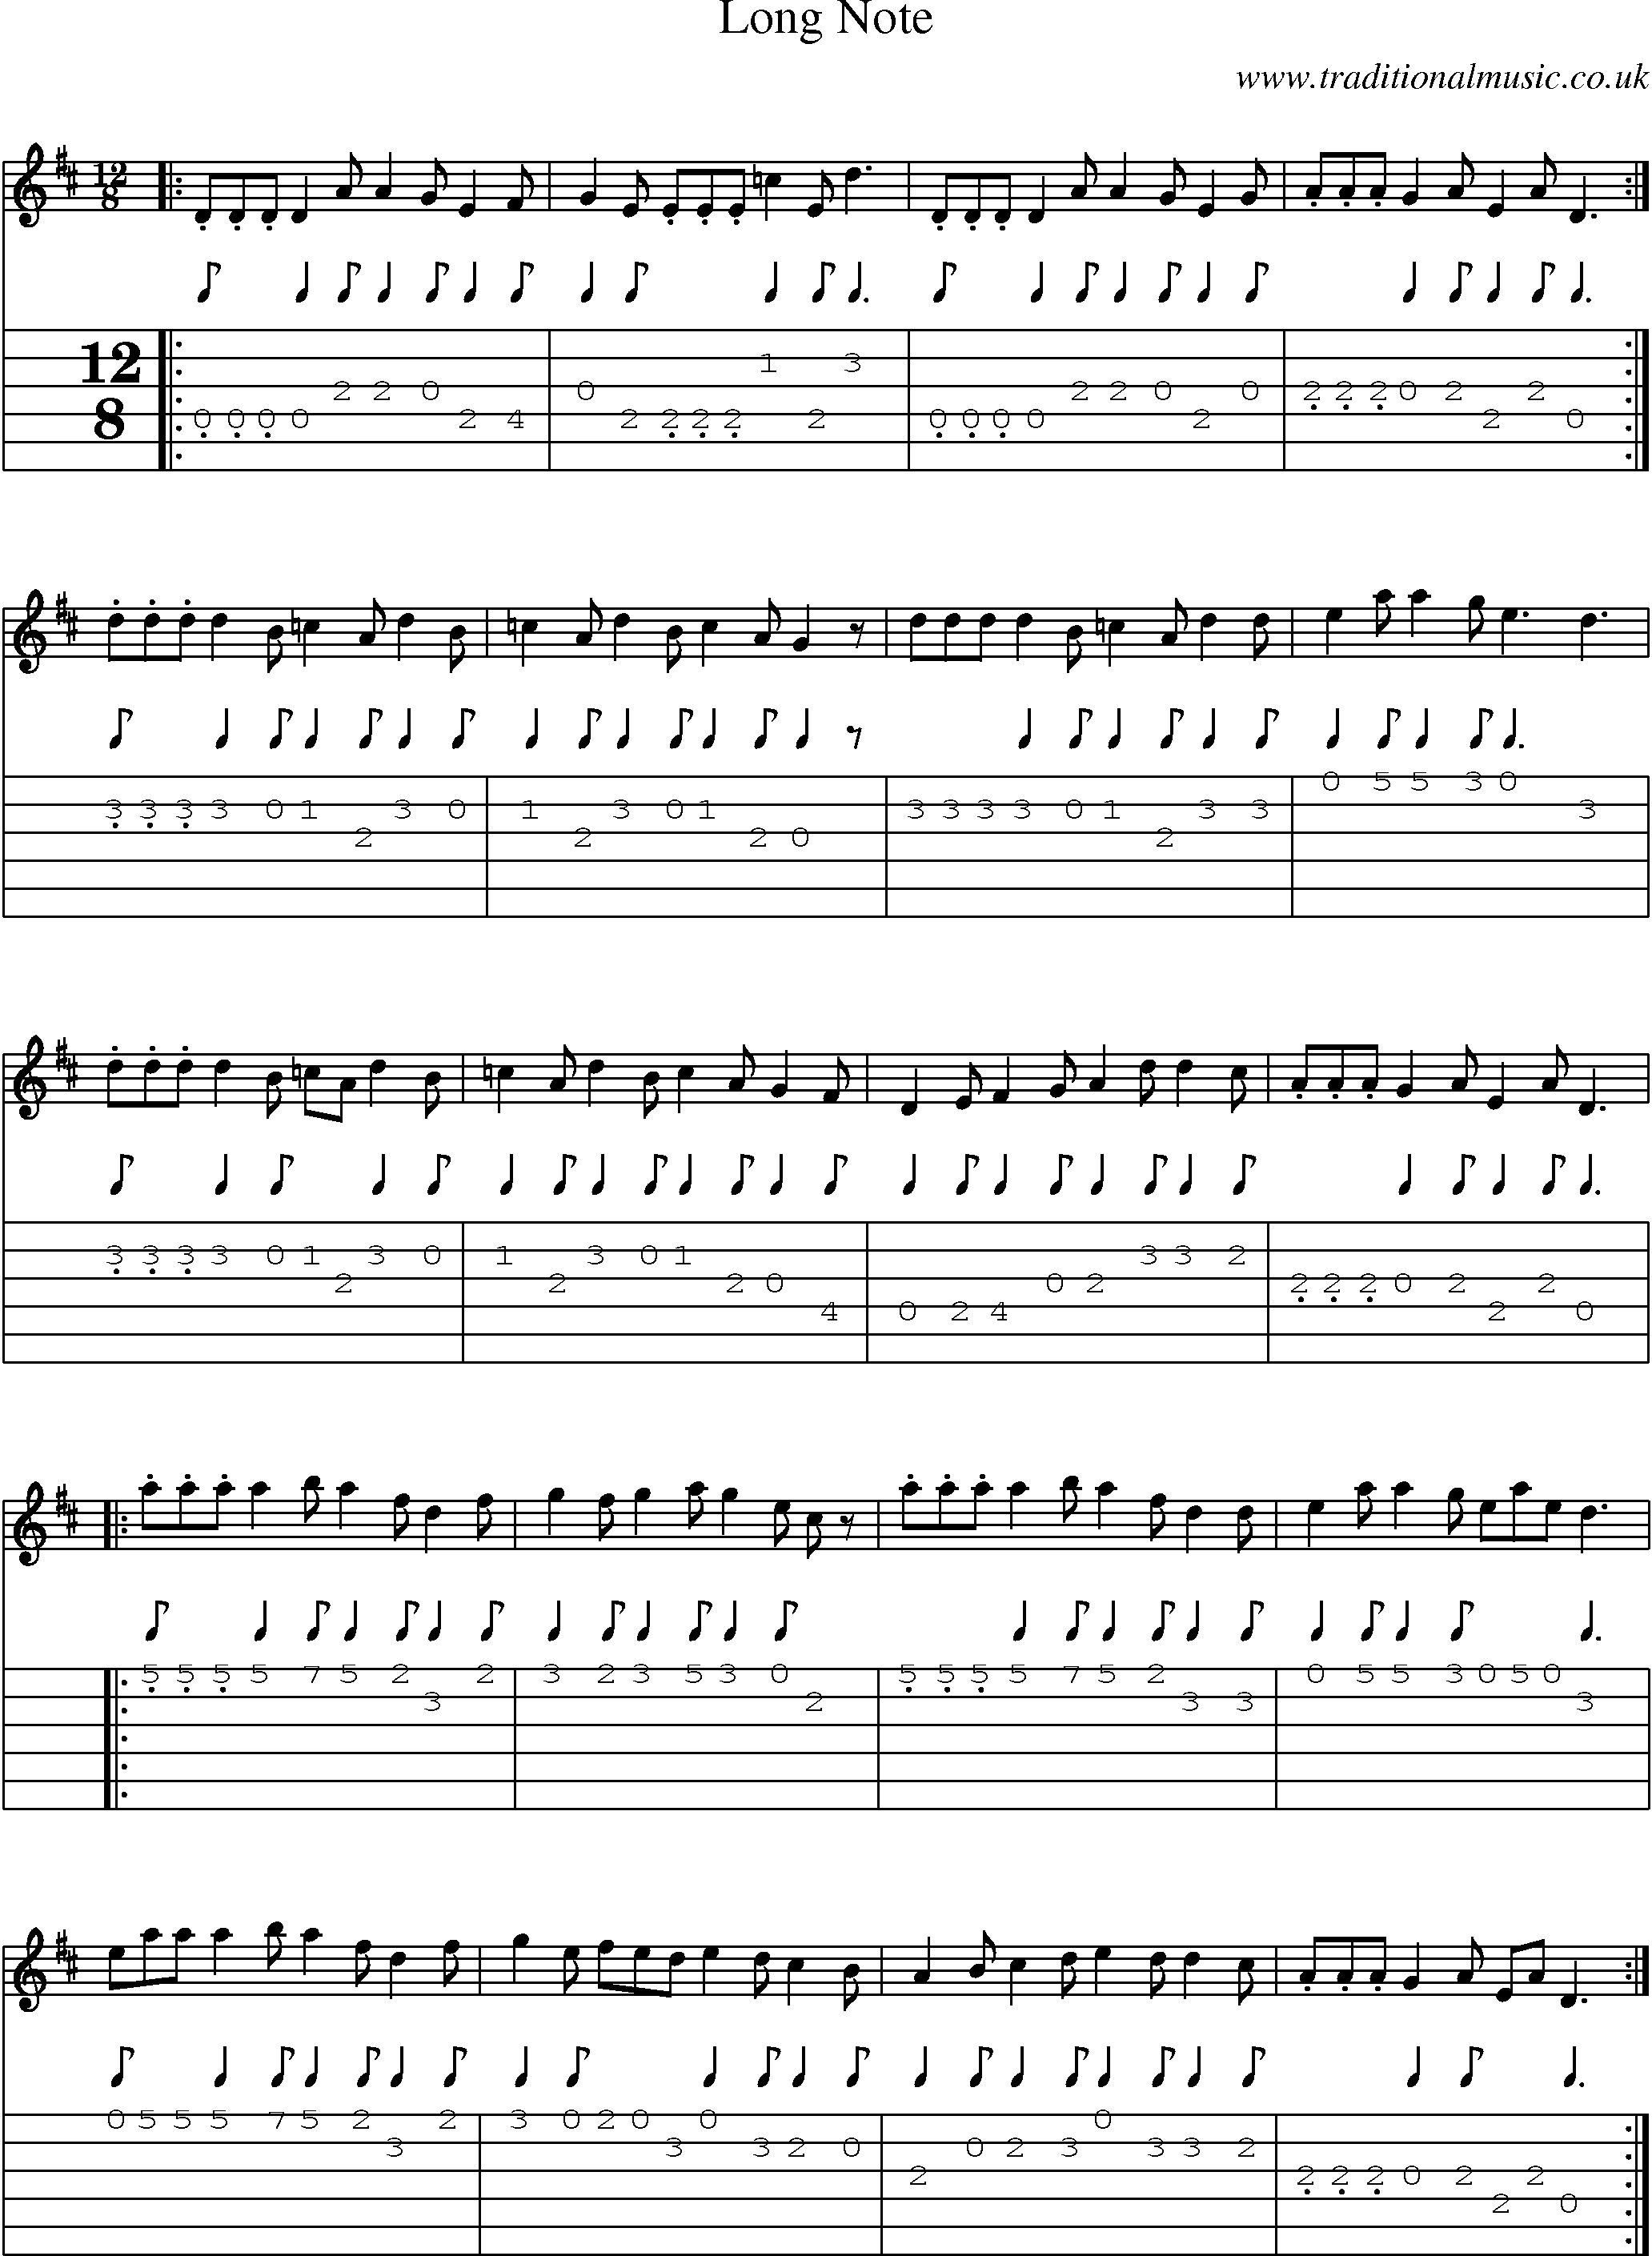 Music Score and Guitar Tabs for Long Note